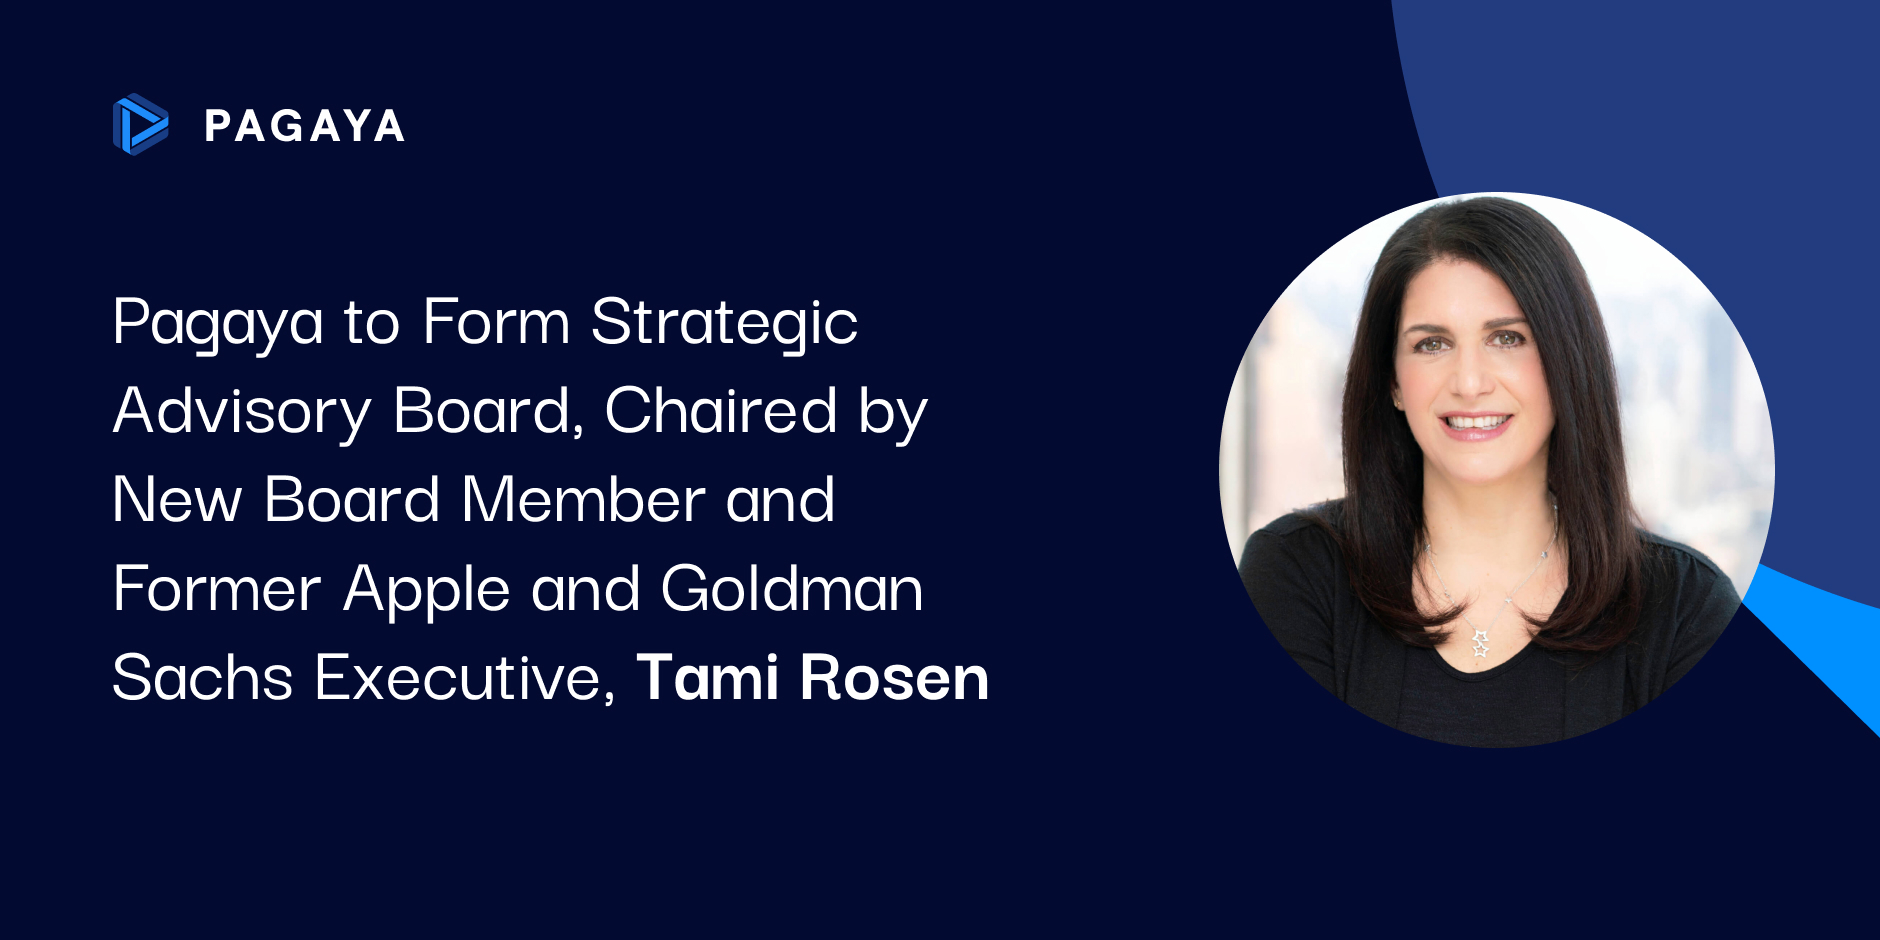 Pagaya to Form Strategic Advisory Board, Chaired by New Board Member and Former Apple and Goldman Sachs Executive, Tami Rosen